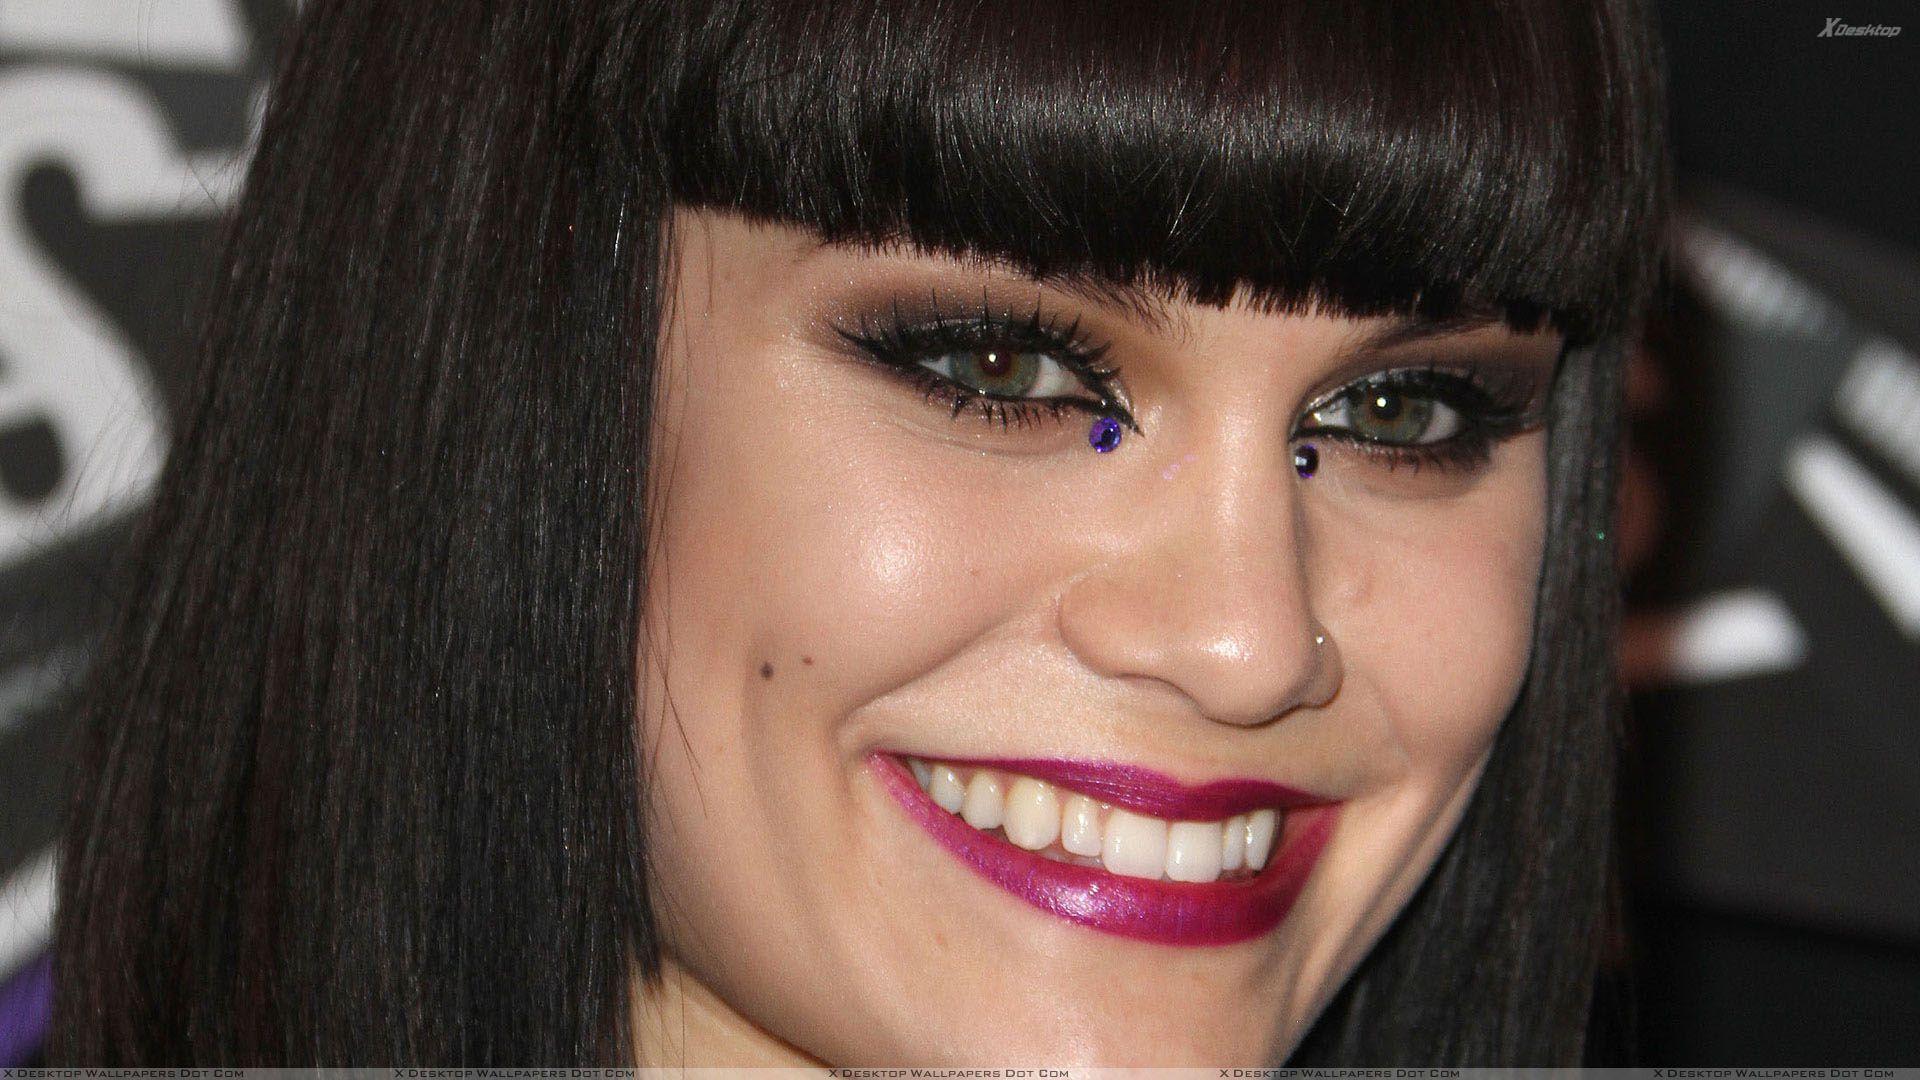 Jessie J Smiling Cute Eyes And Pink Lips Face Closeup Wallpaper